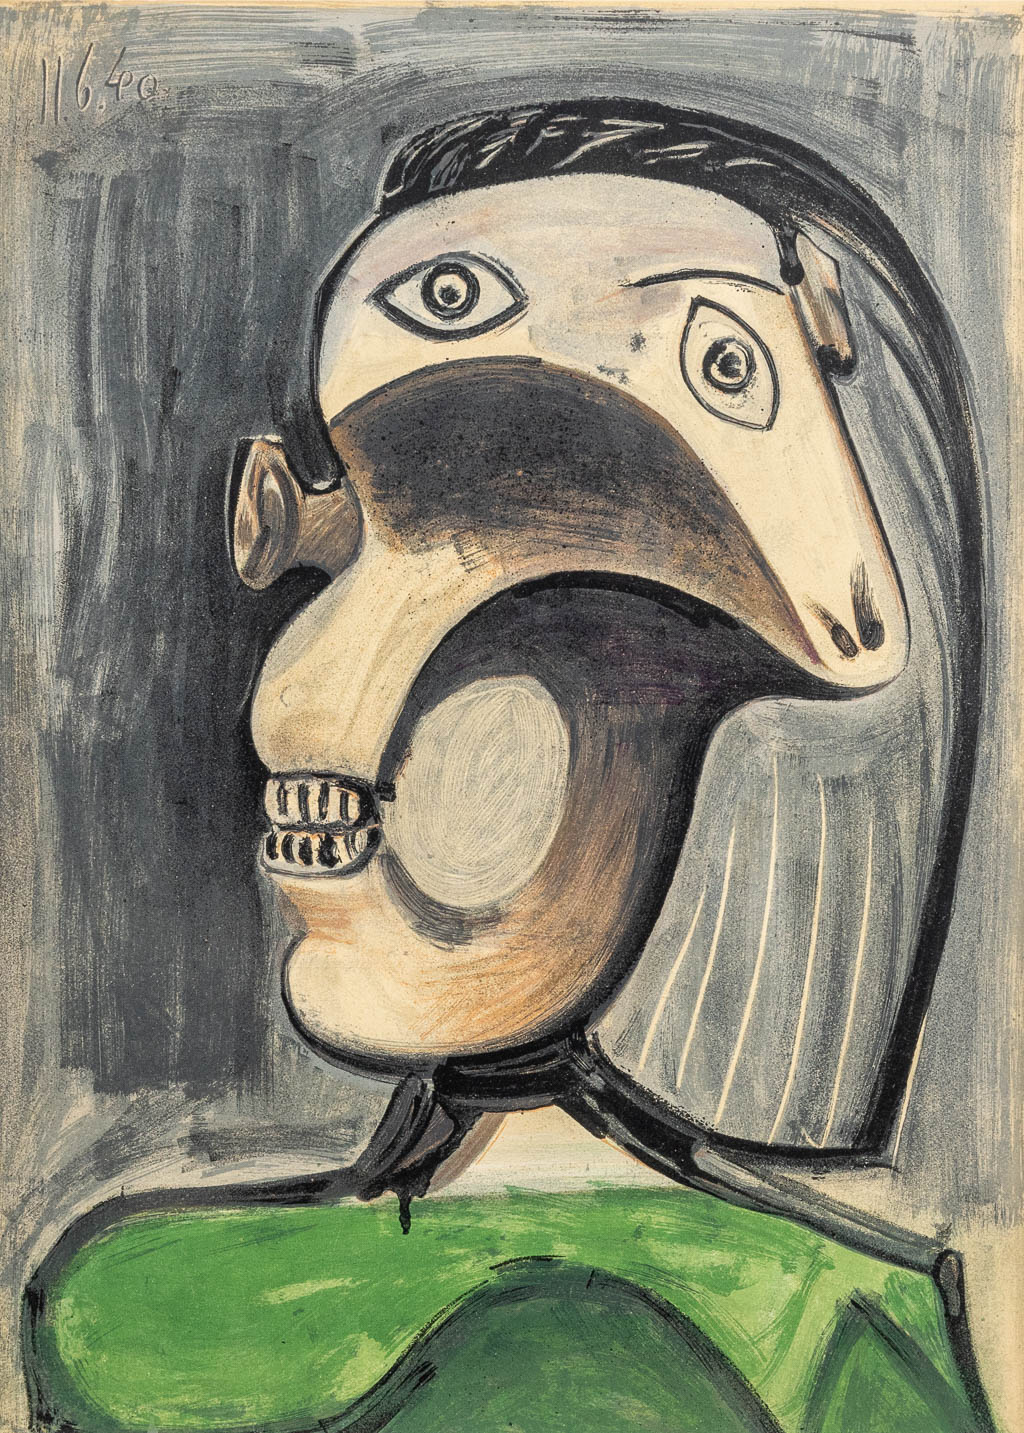 Pablo PICASSO (1881-1973) 'Head Of A Woman' a framed print. (W:26 x H:37 cm)